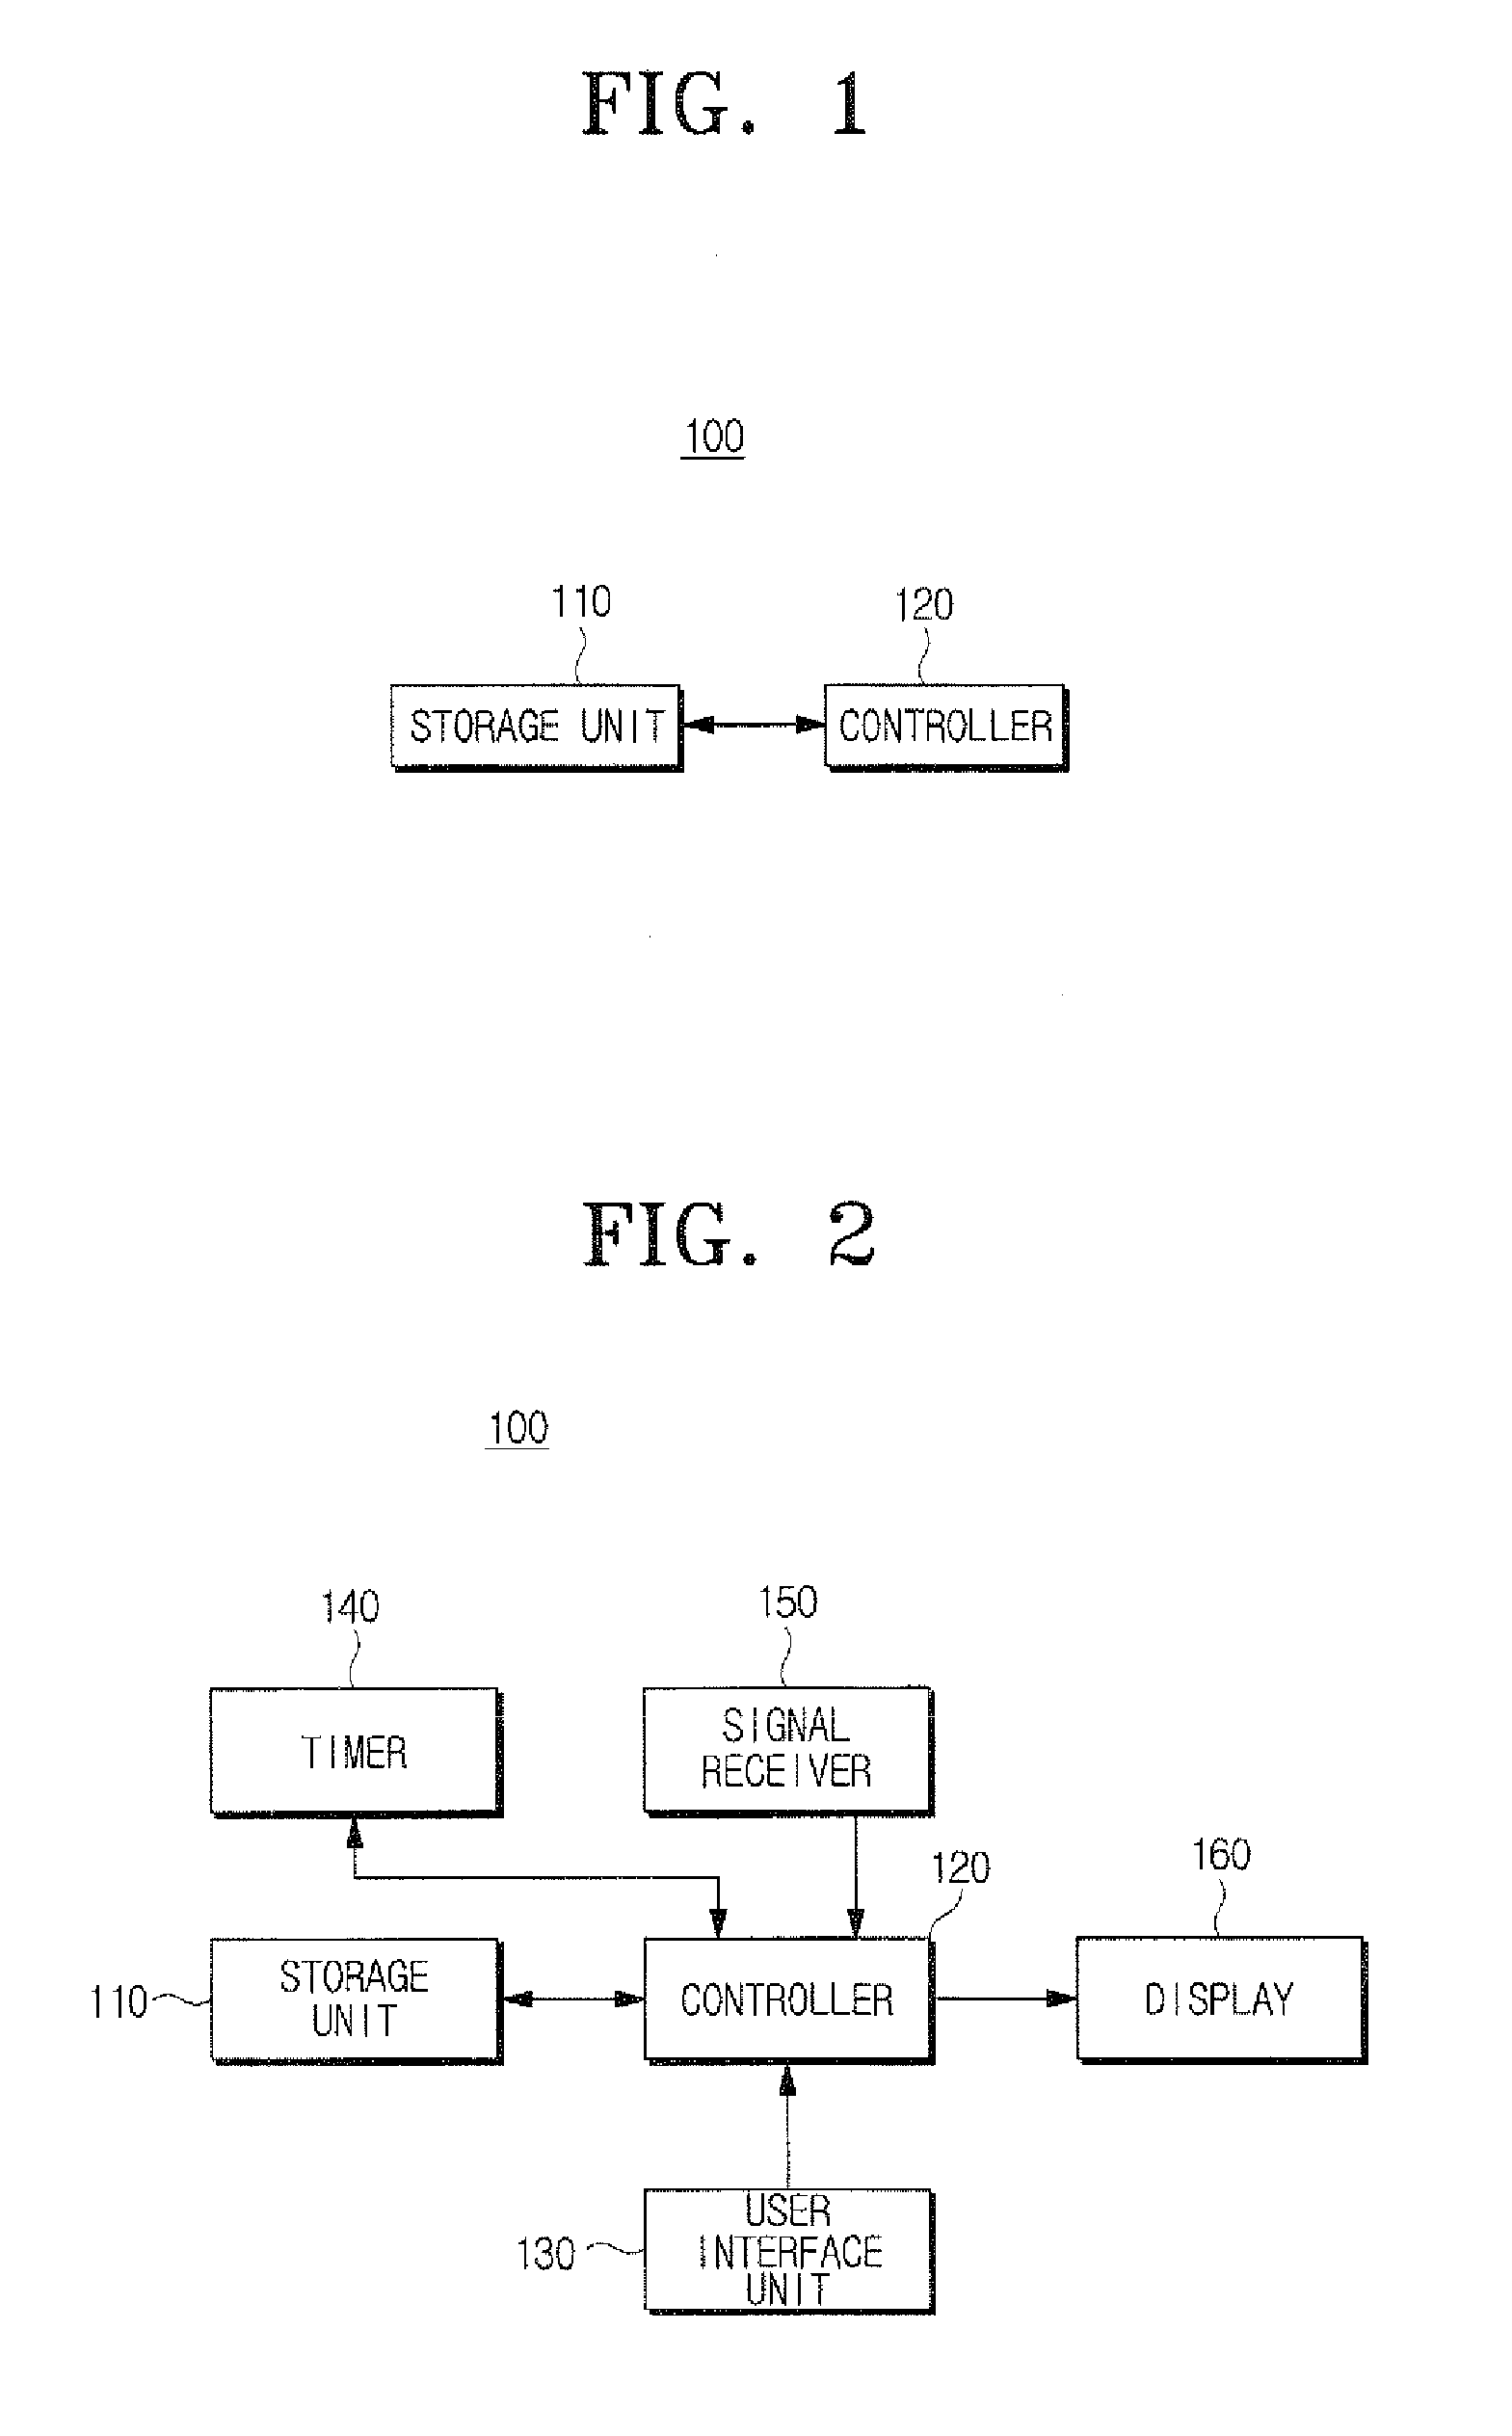 Image display apparatus and method for displaying broadcast schedule list